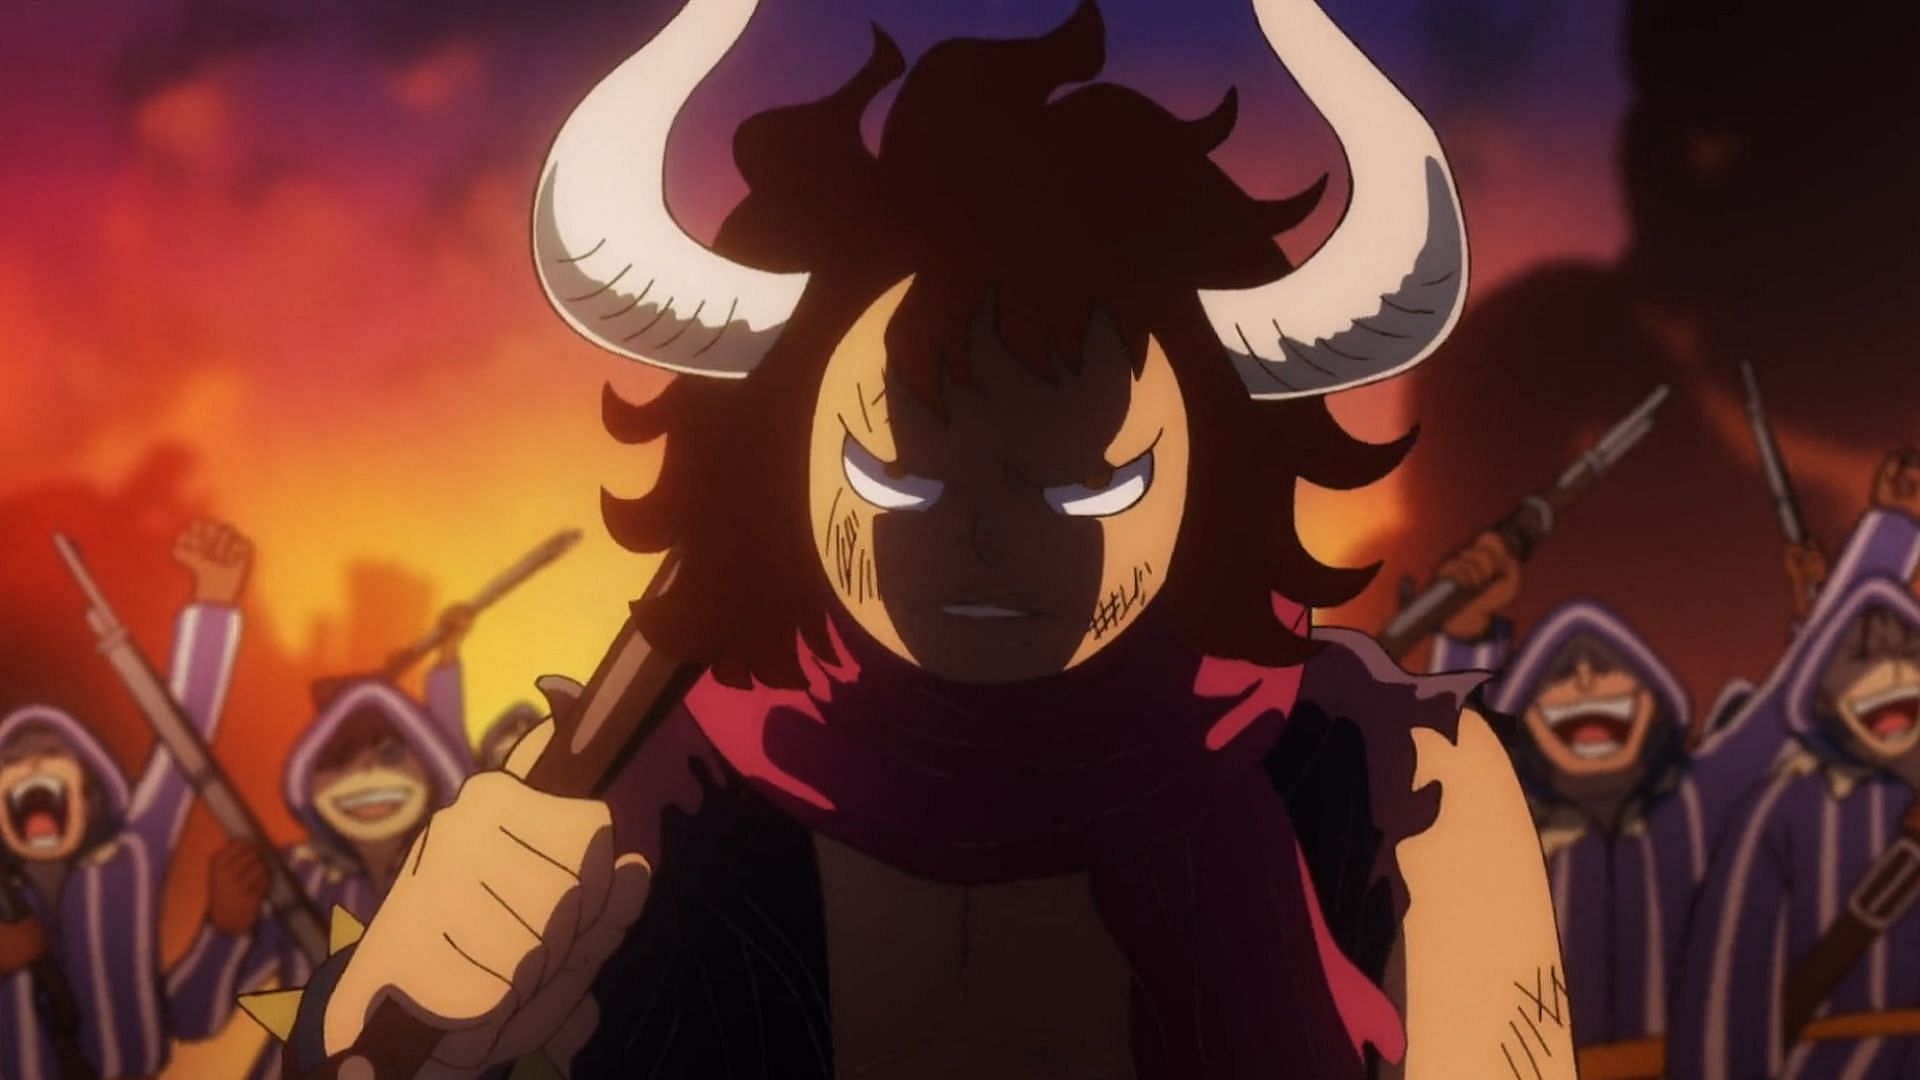 Twitter erupts after One Piece episode 1016 shows the monster captains  going against Kaido